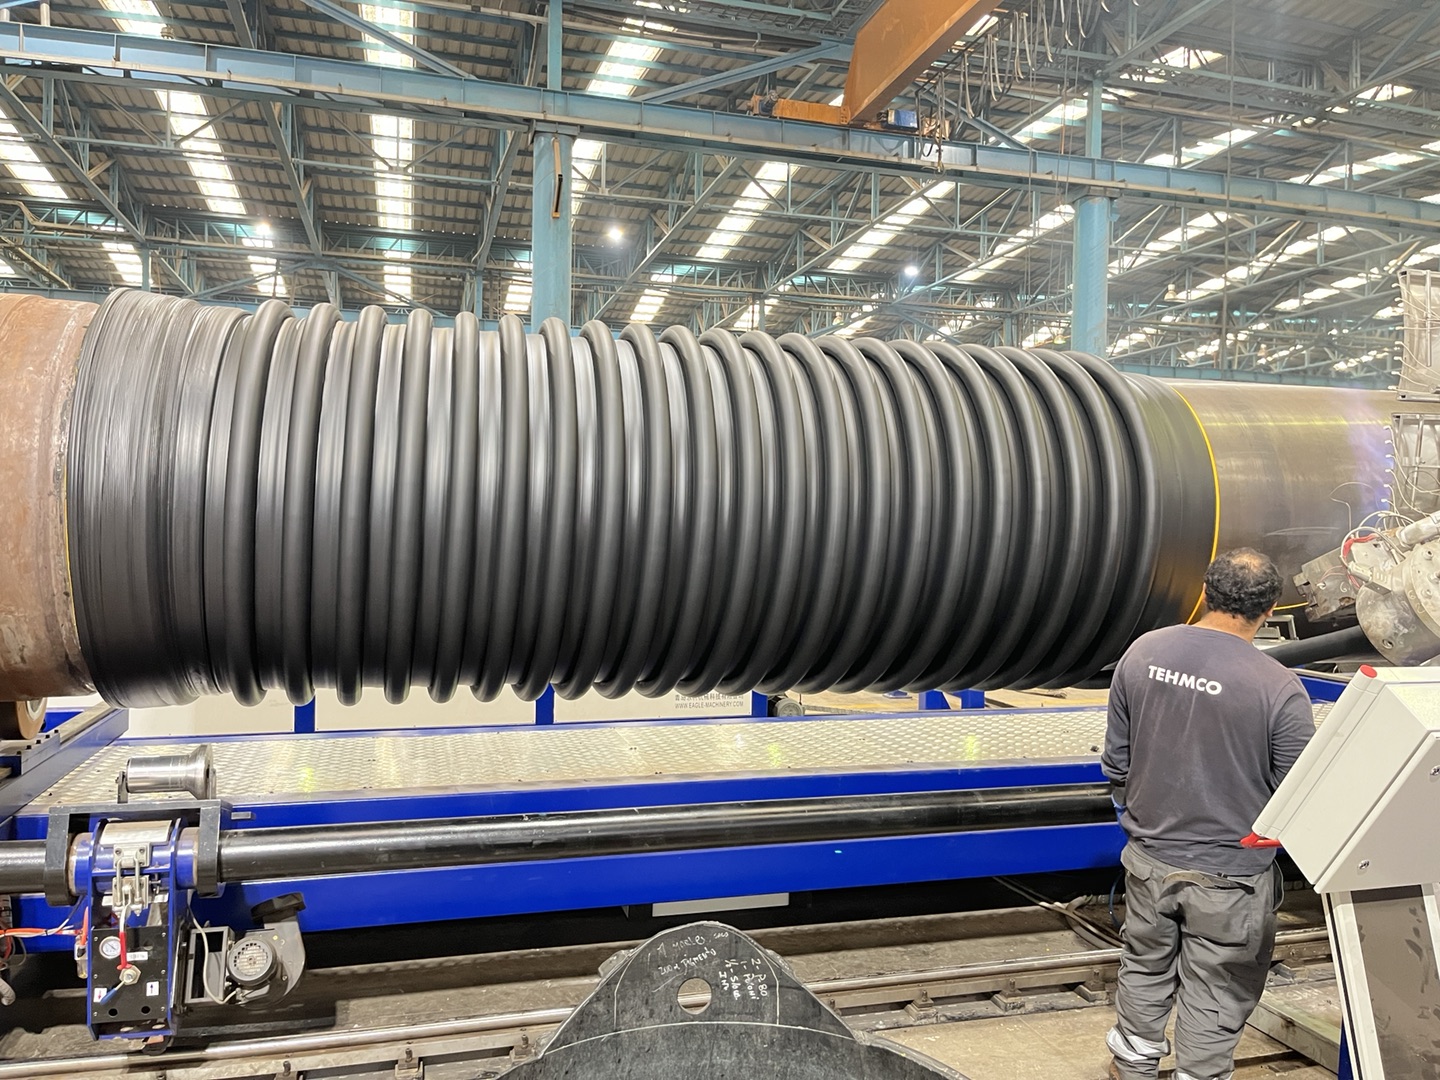 HDPE spiral corrugated pipe production line,HDPE spiral pipe production line,krah pipe, HDPE spiral pipes extrusion machine,krah machine, helical extrusion, profilline pipe,profileen pipe, profilline machine,structured wall non-pressure pipes